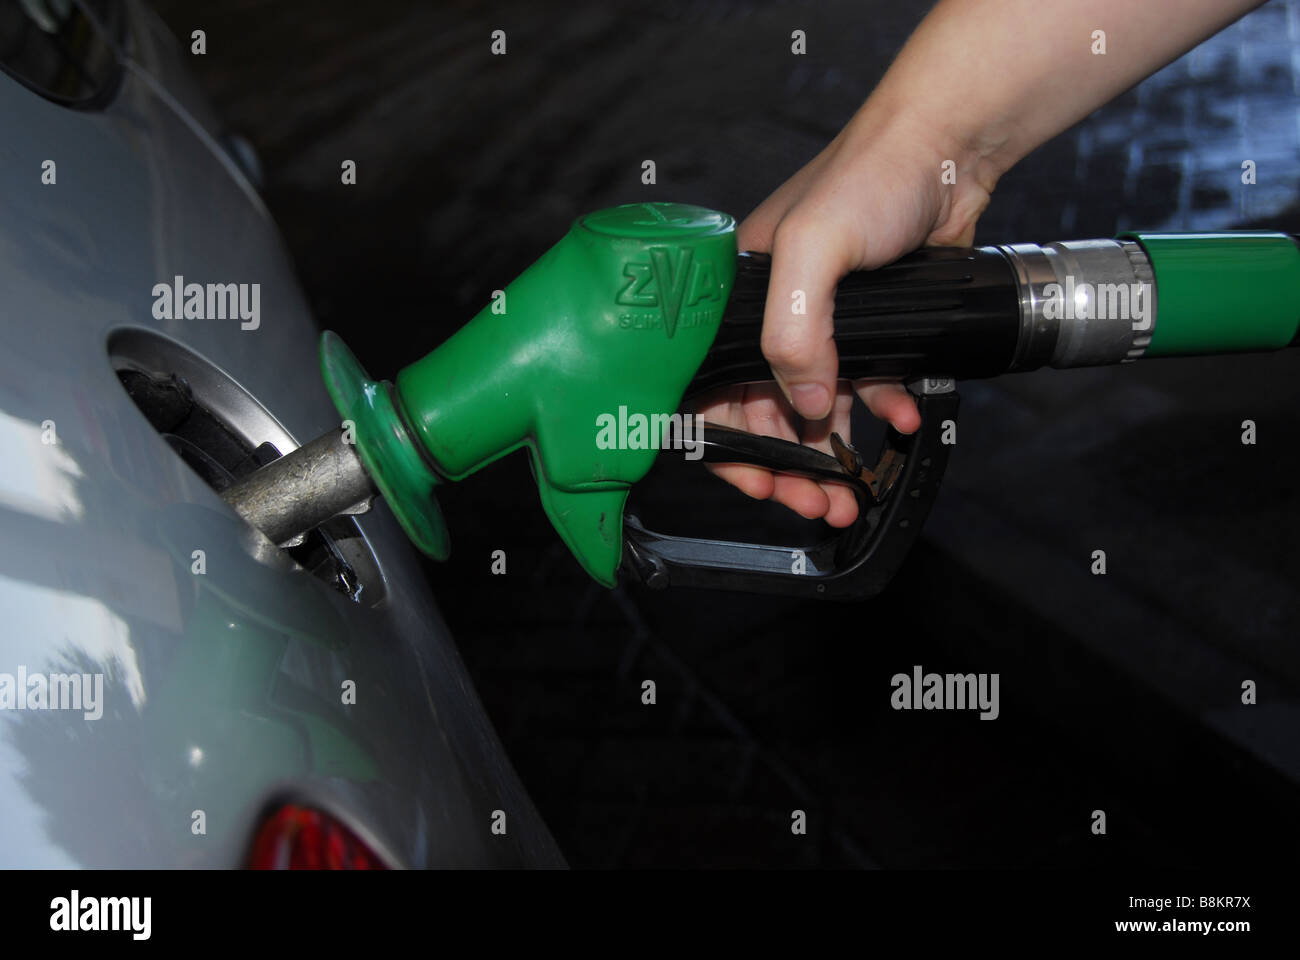 Refuelling a car Stock Photo